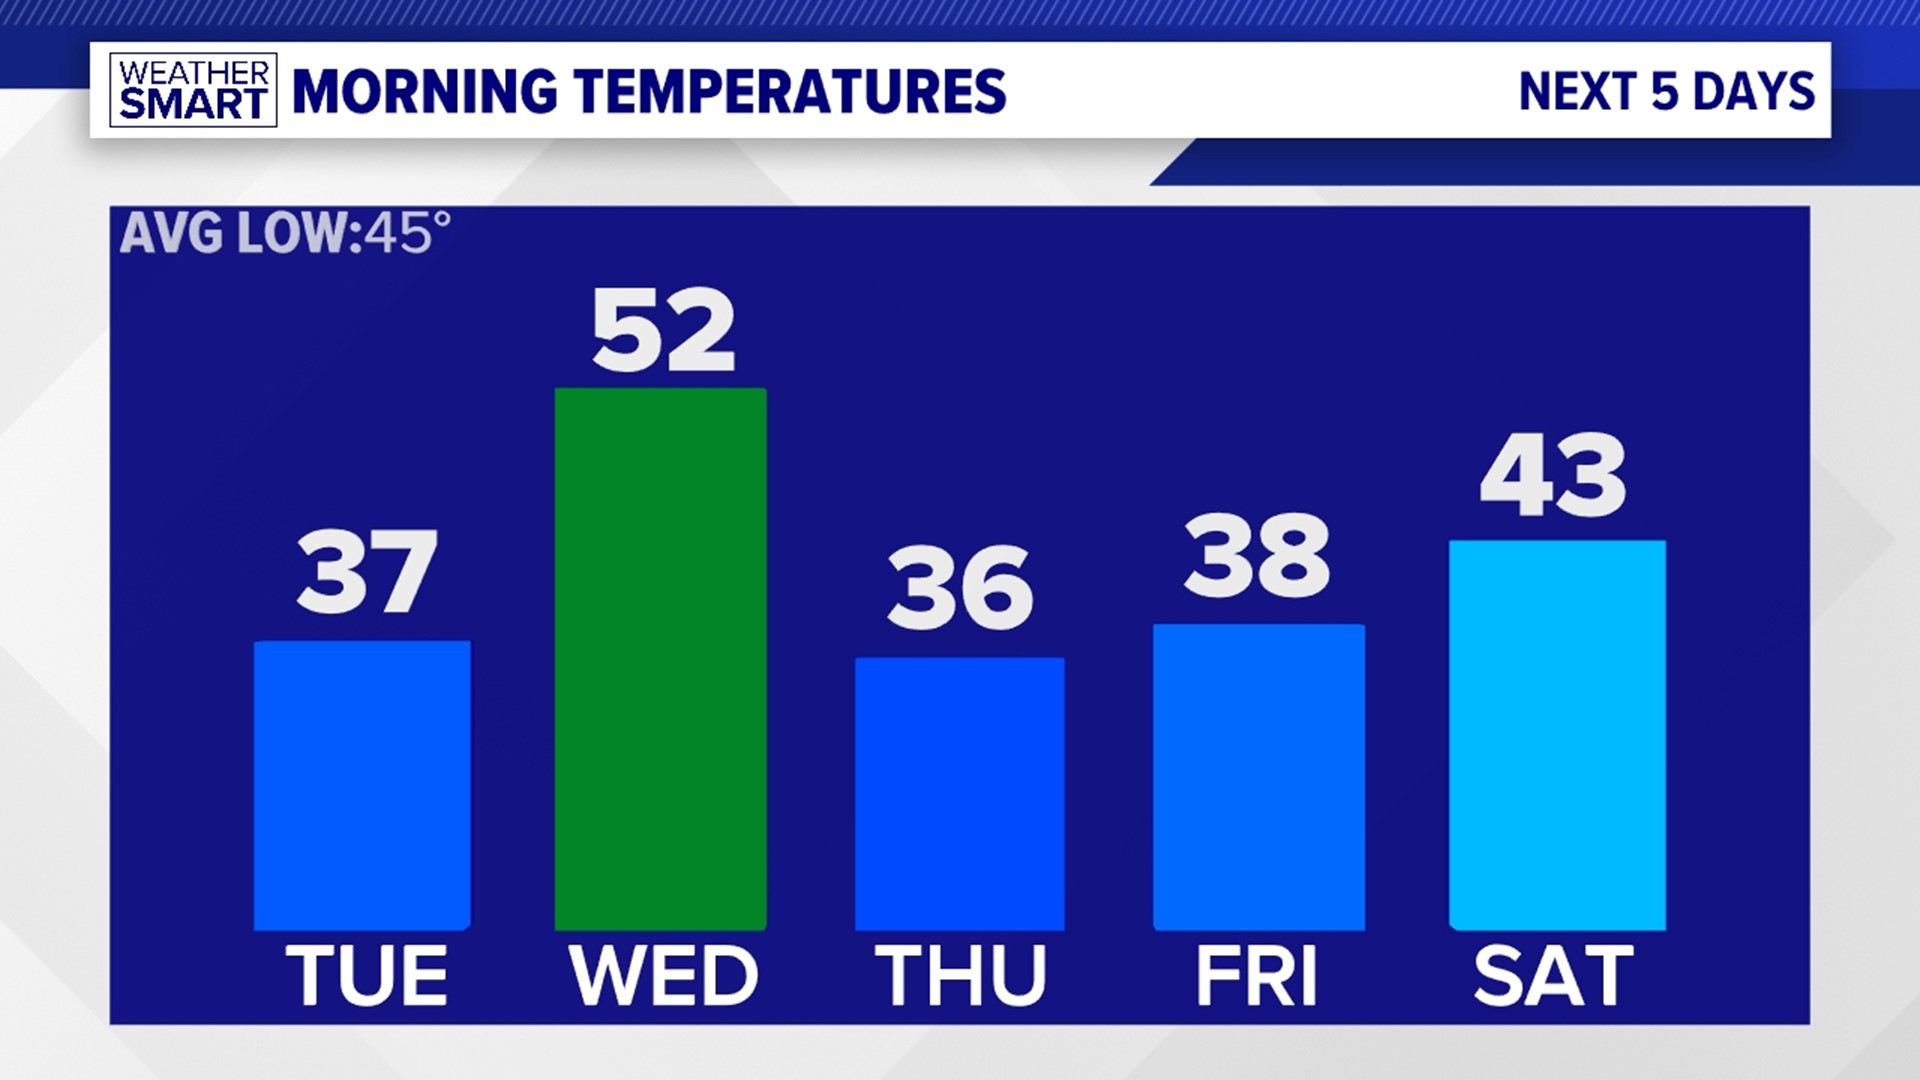 We're back into the 30s to start off Tuesday morning. Stray showers hang on through Wednesday, followed by more frost concerns to end the week.